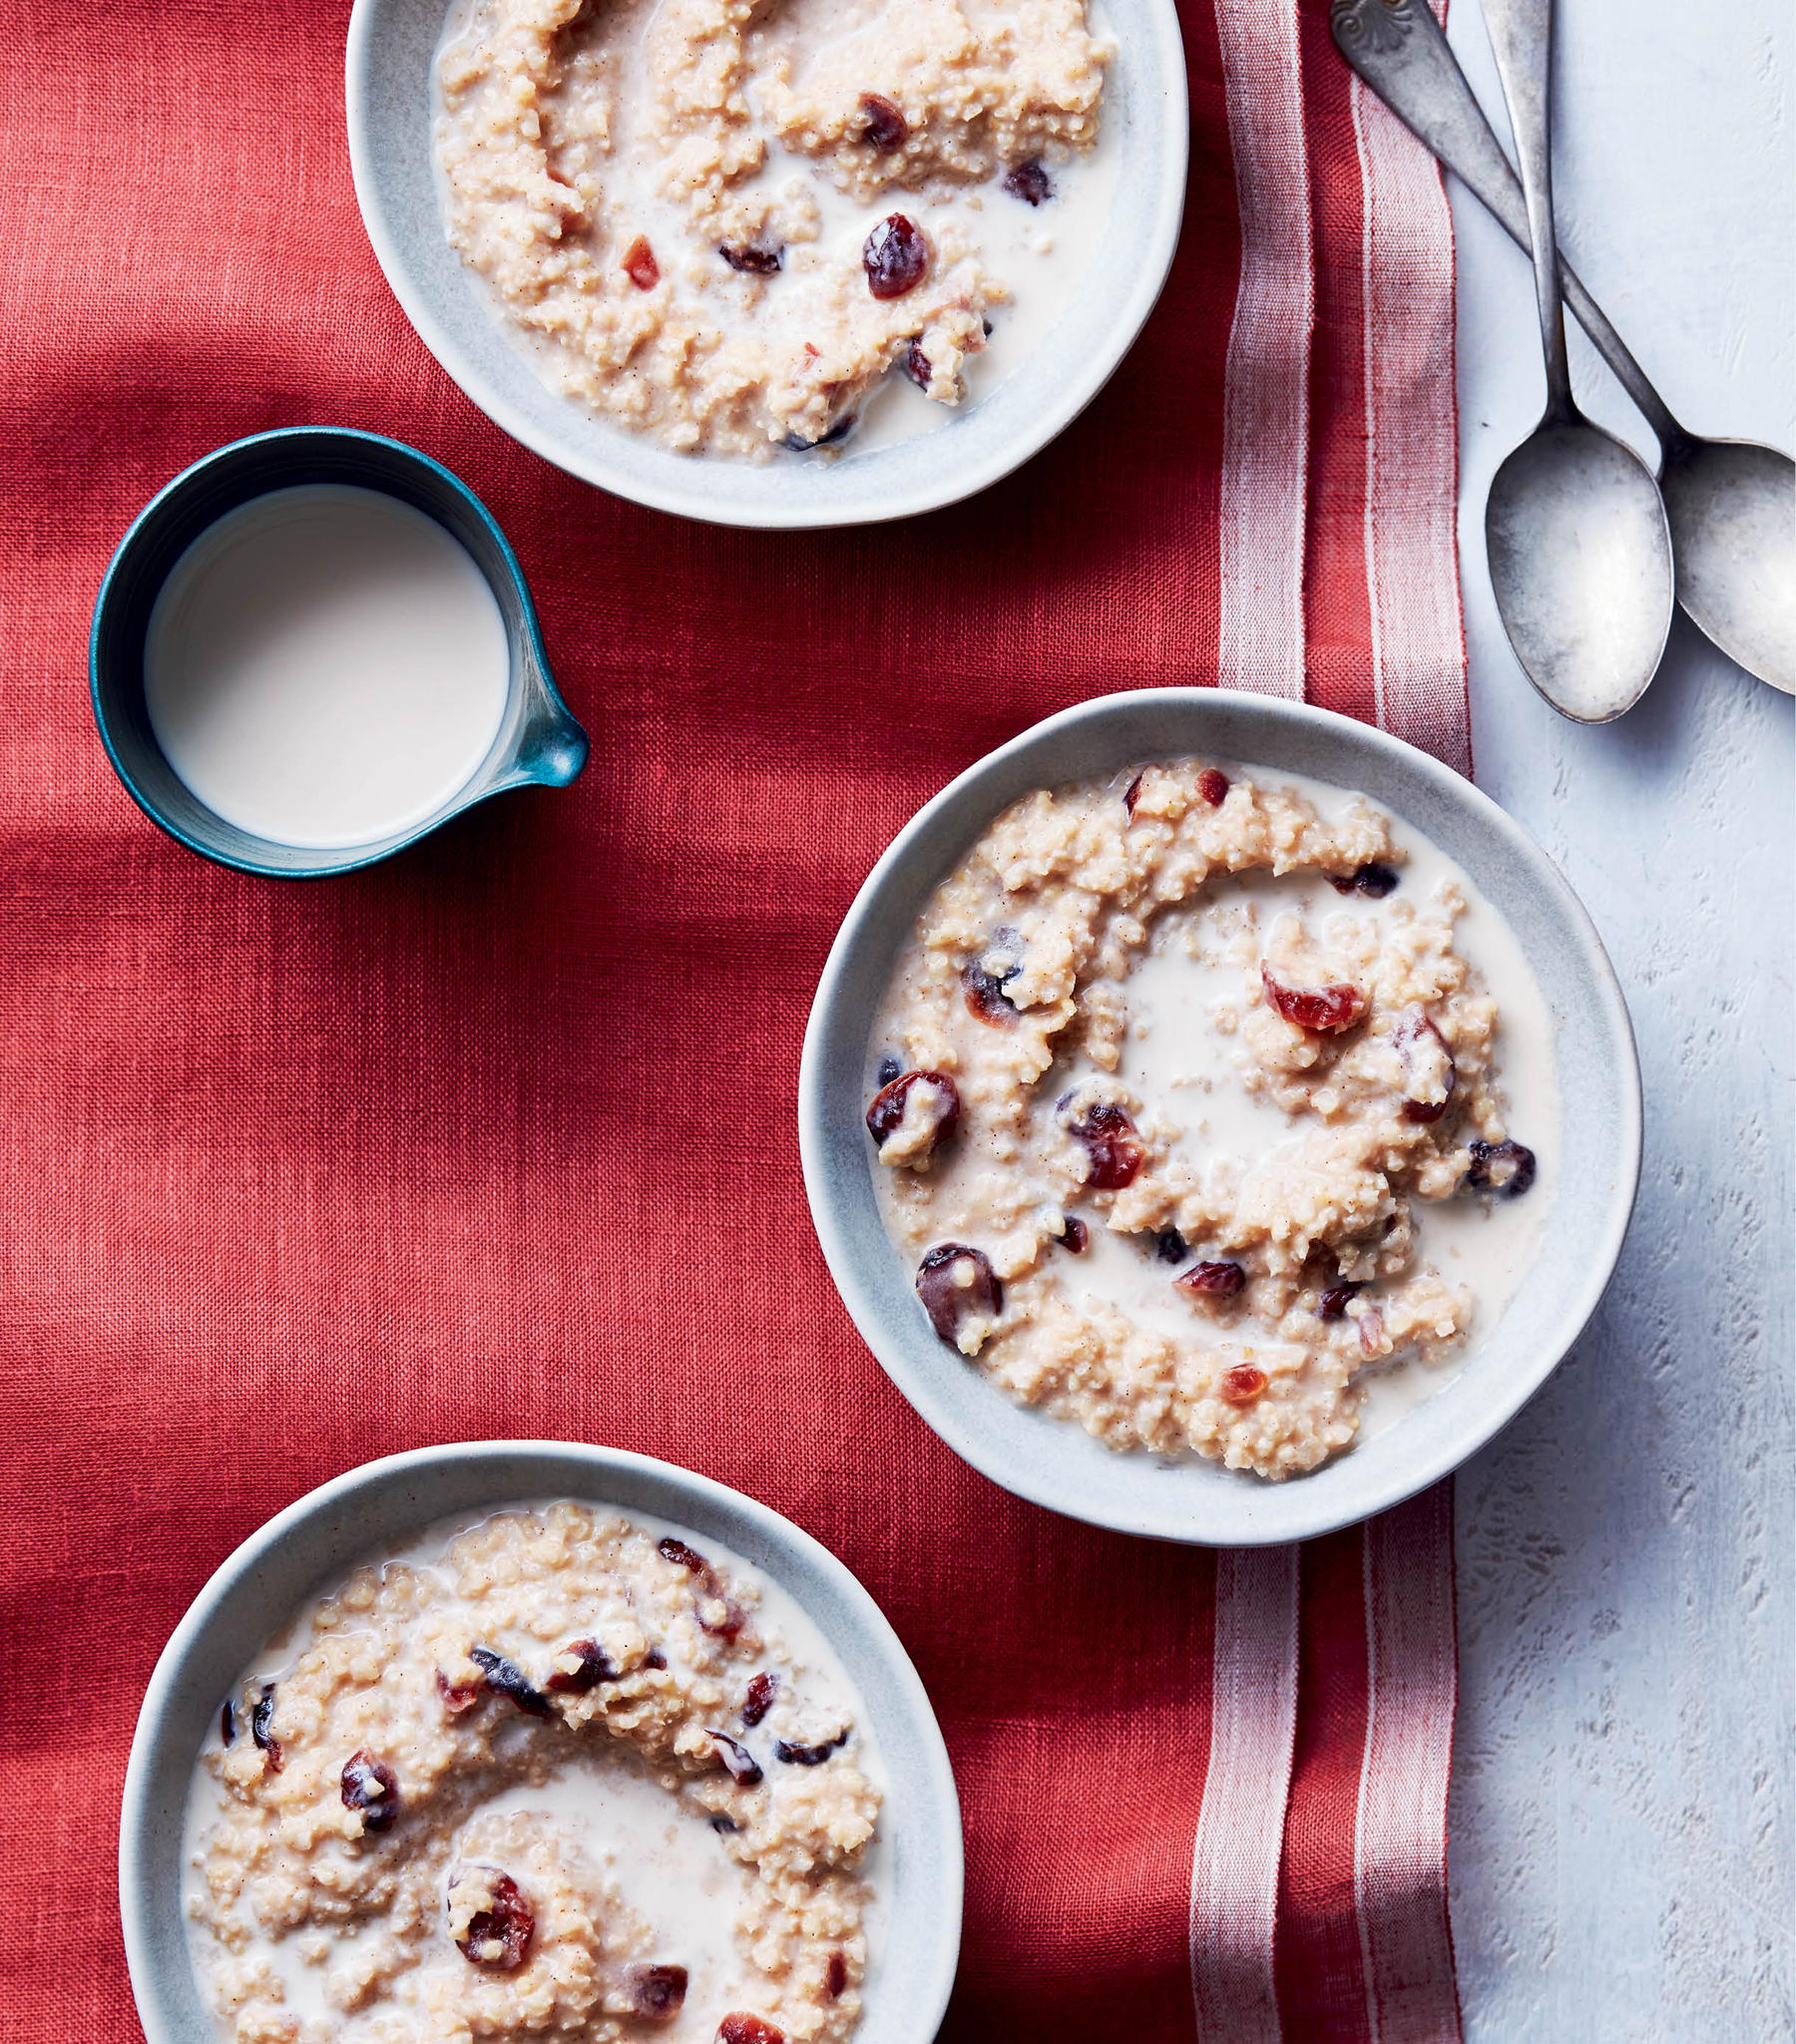 another page with a picture of three bowls of oats on a red table runner